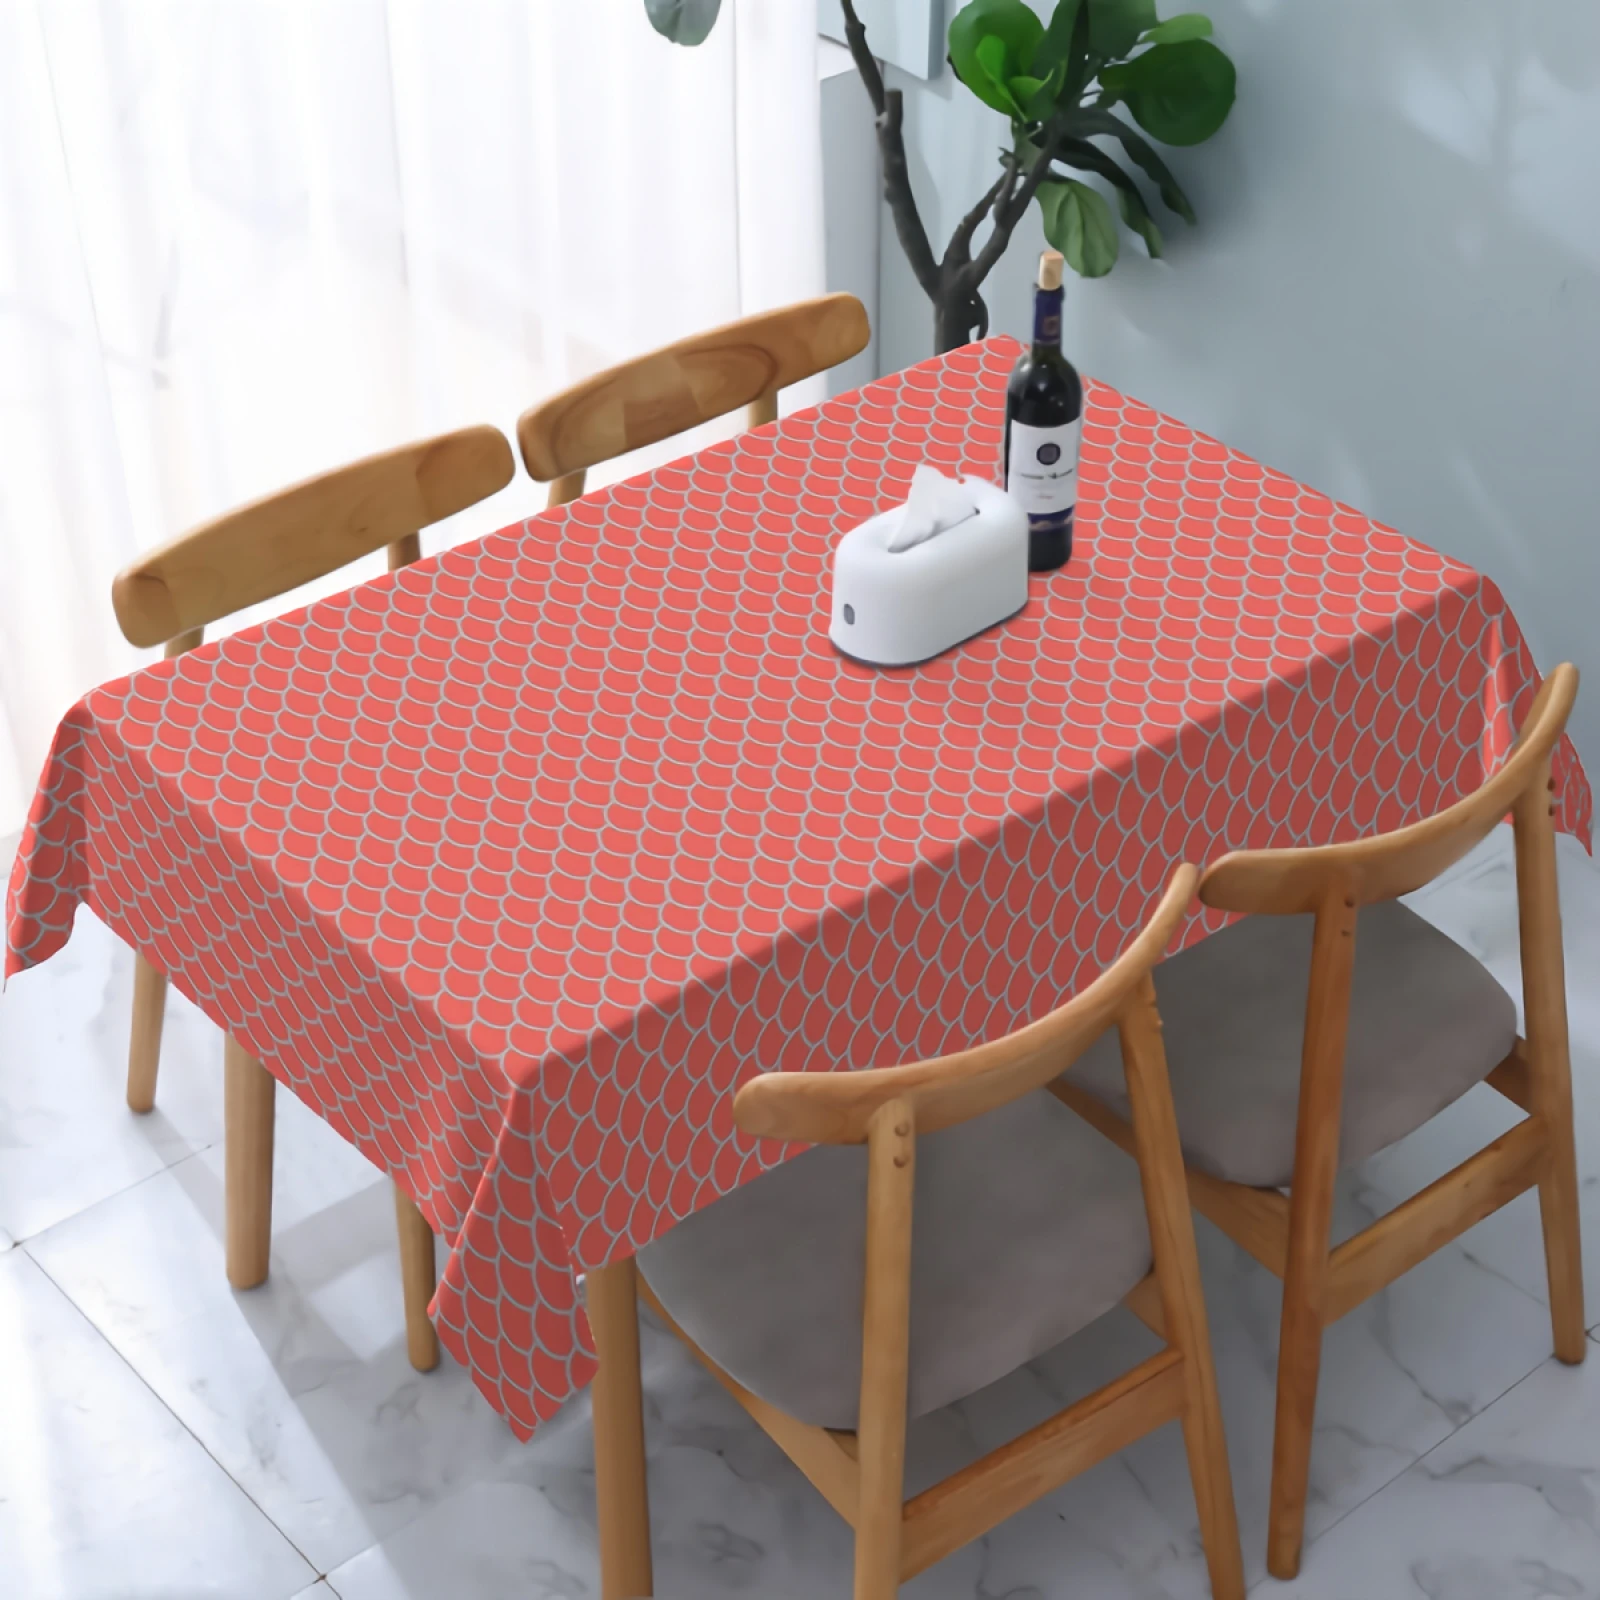 

Red Mermaid Tablecloth Washable Stain and Wrinkle Resistant Water-Proof Table Cloth for Dining Table Party Home Decor 54x72 Inch